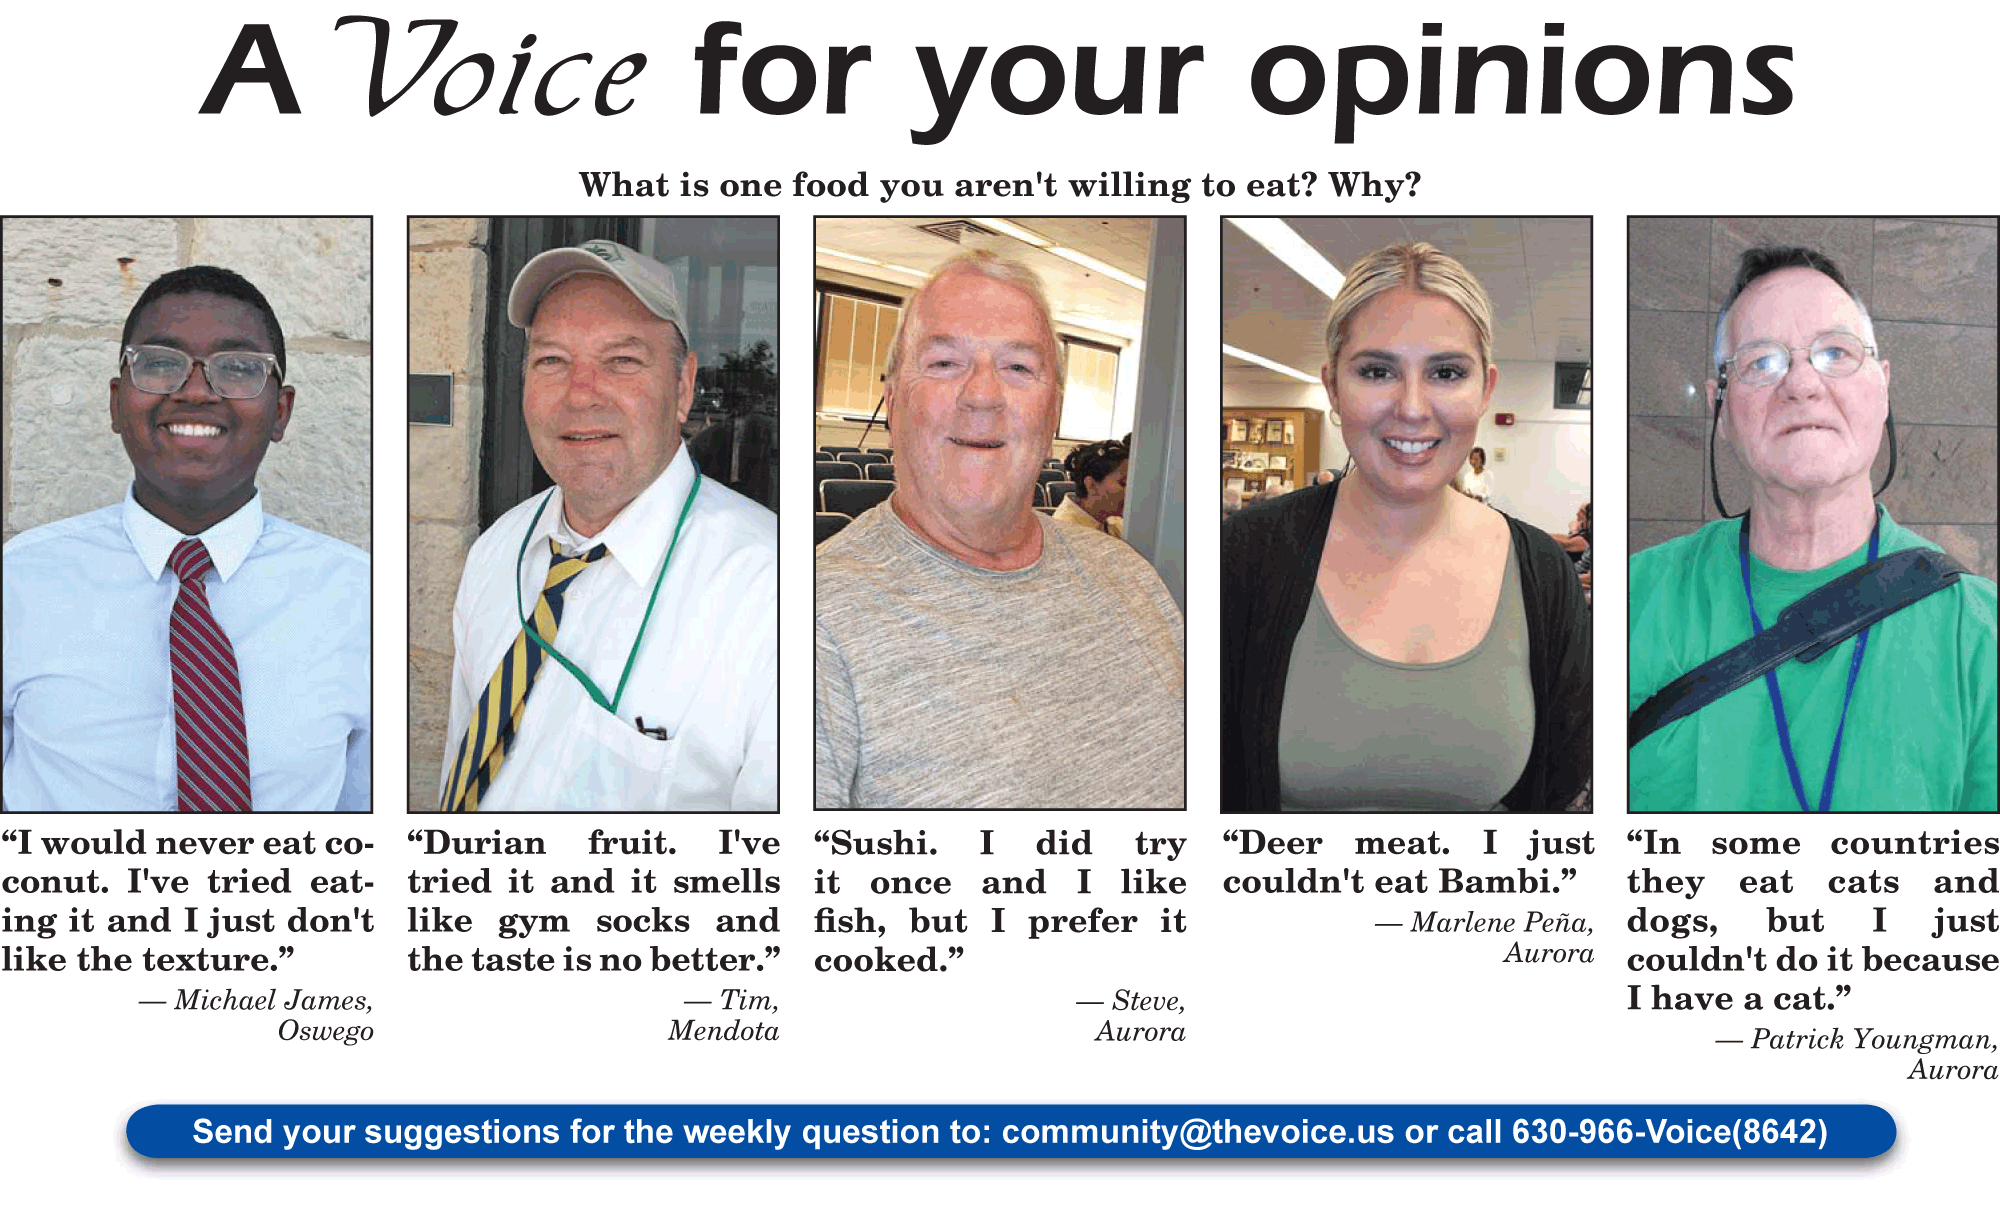 A Voice For Your Opinions July 12, 2018